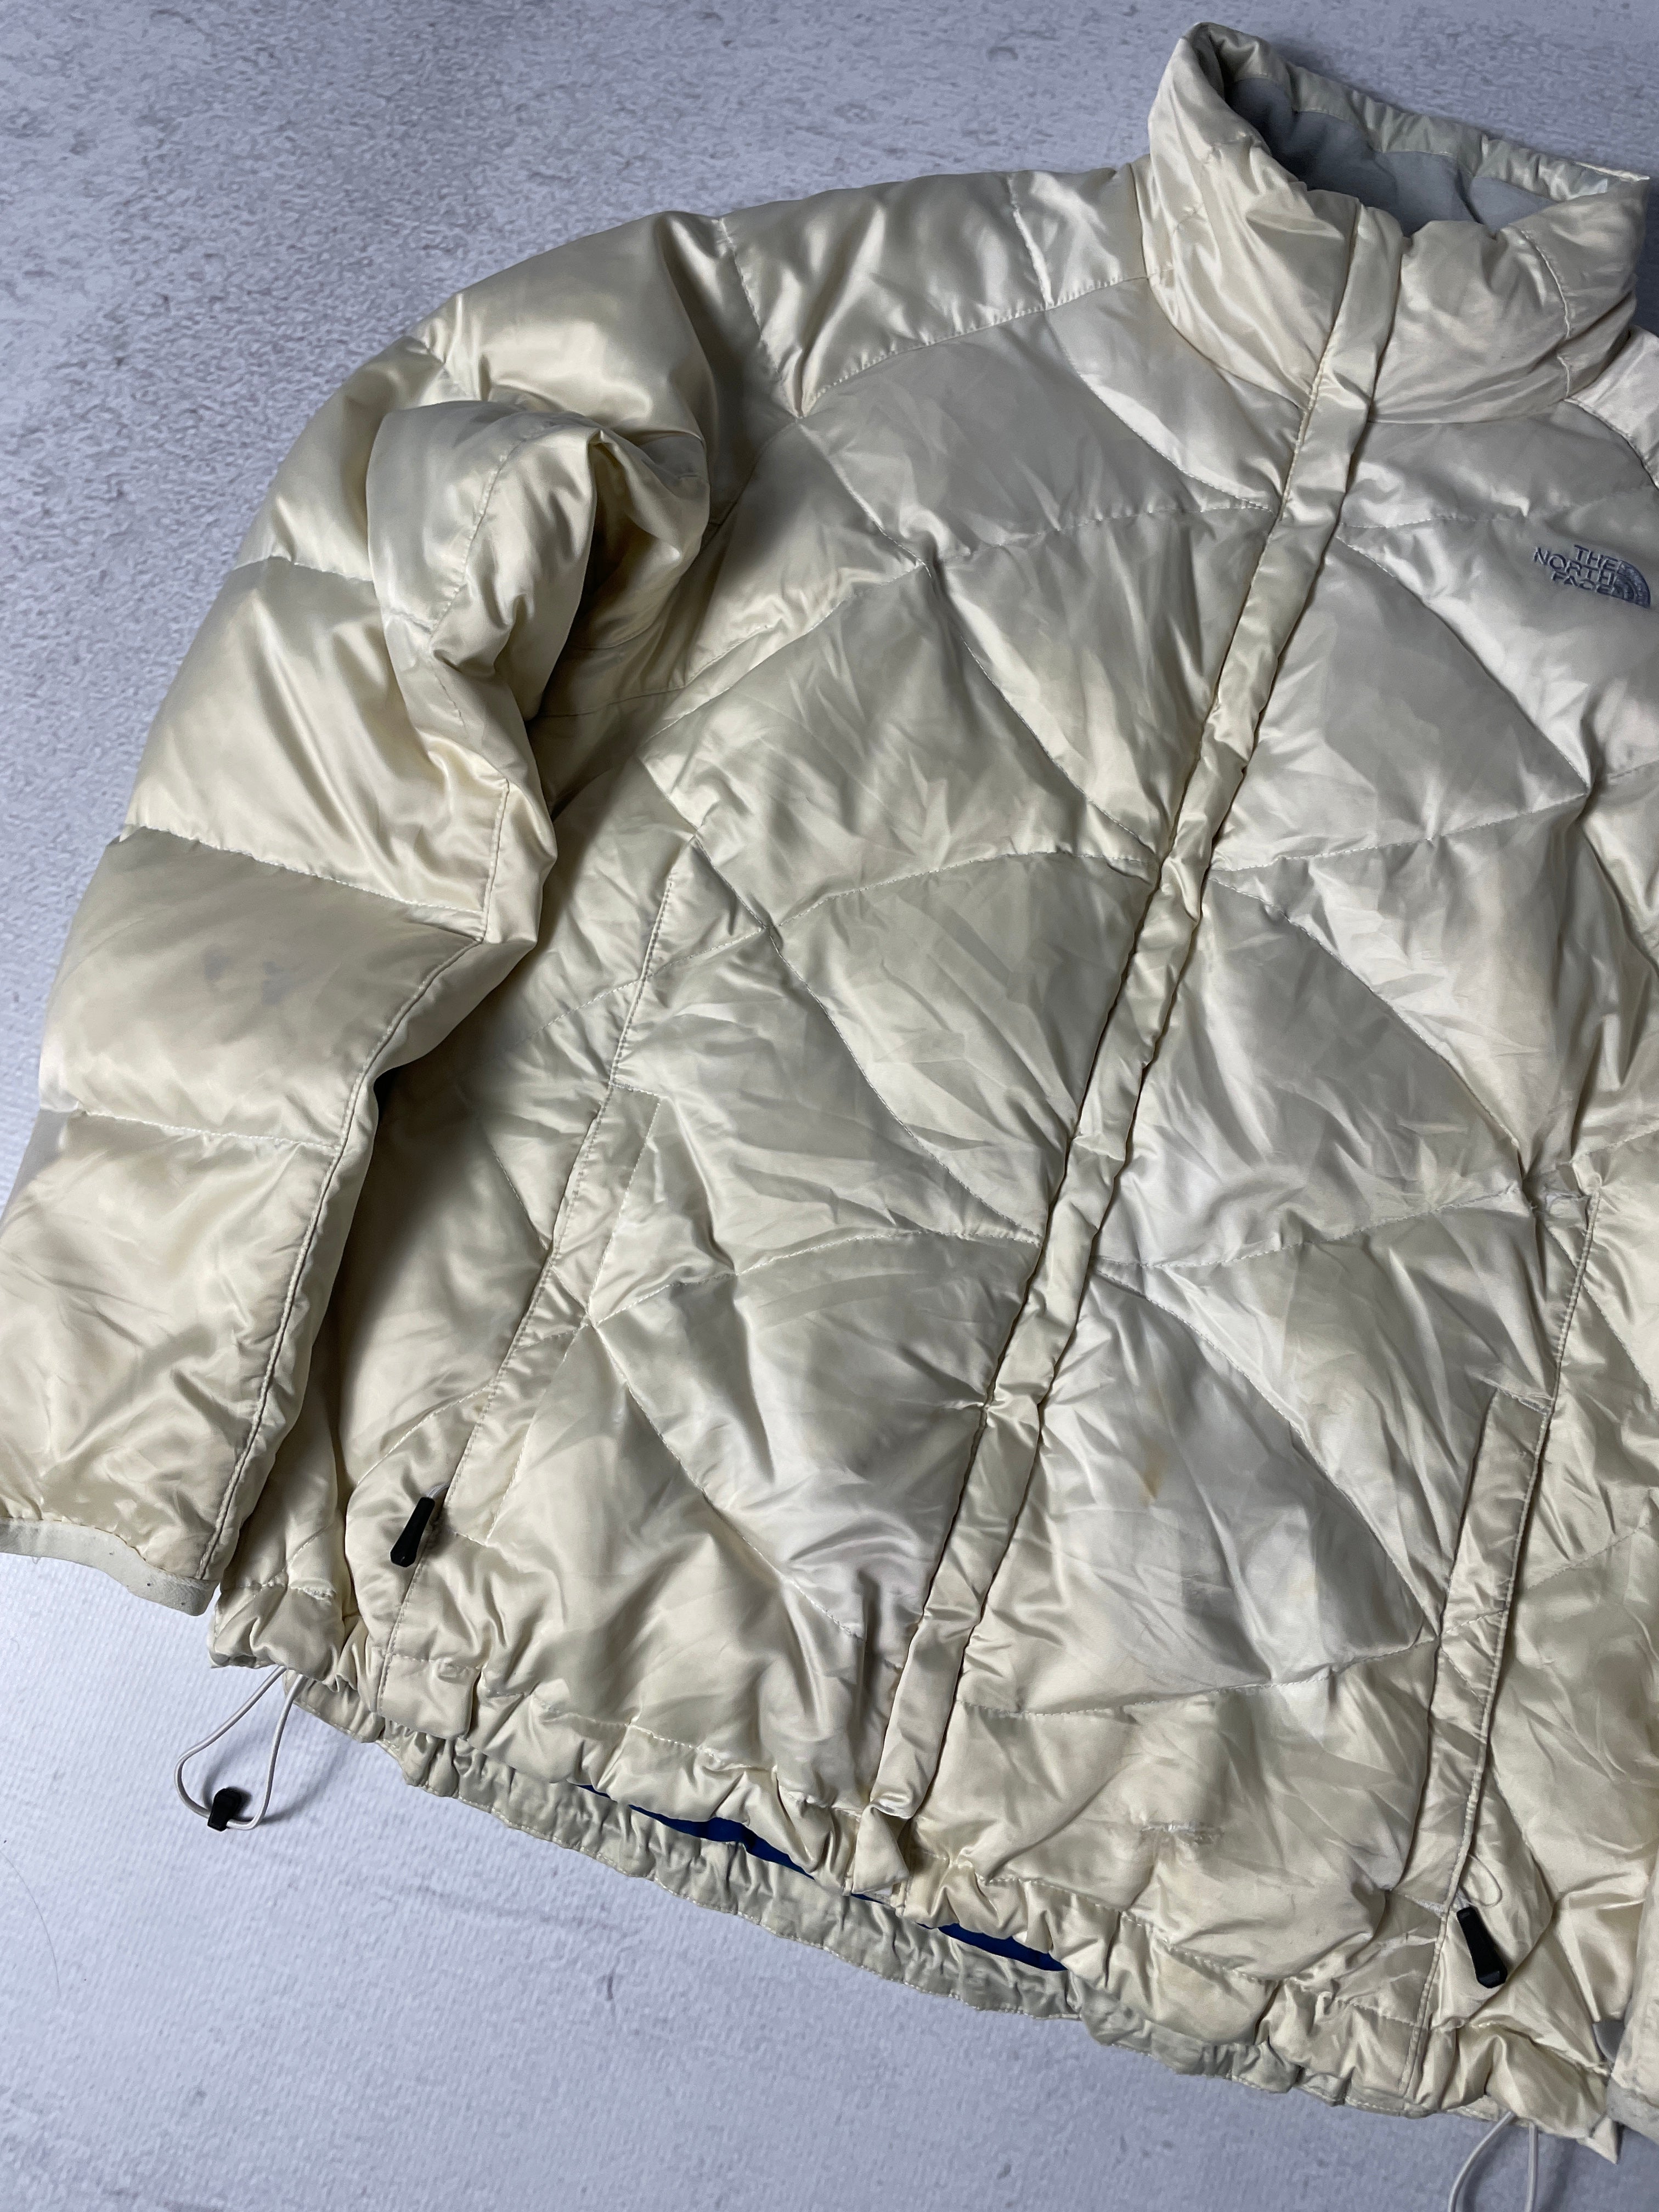 Vintage The North Face 550 Series Nuptse Puffer Jacket - Women's XL